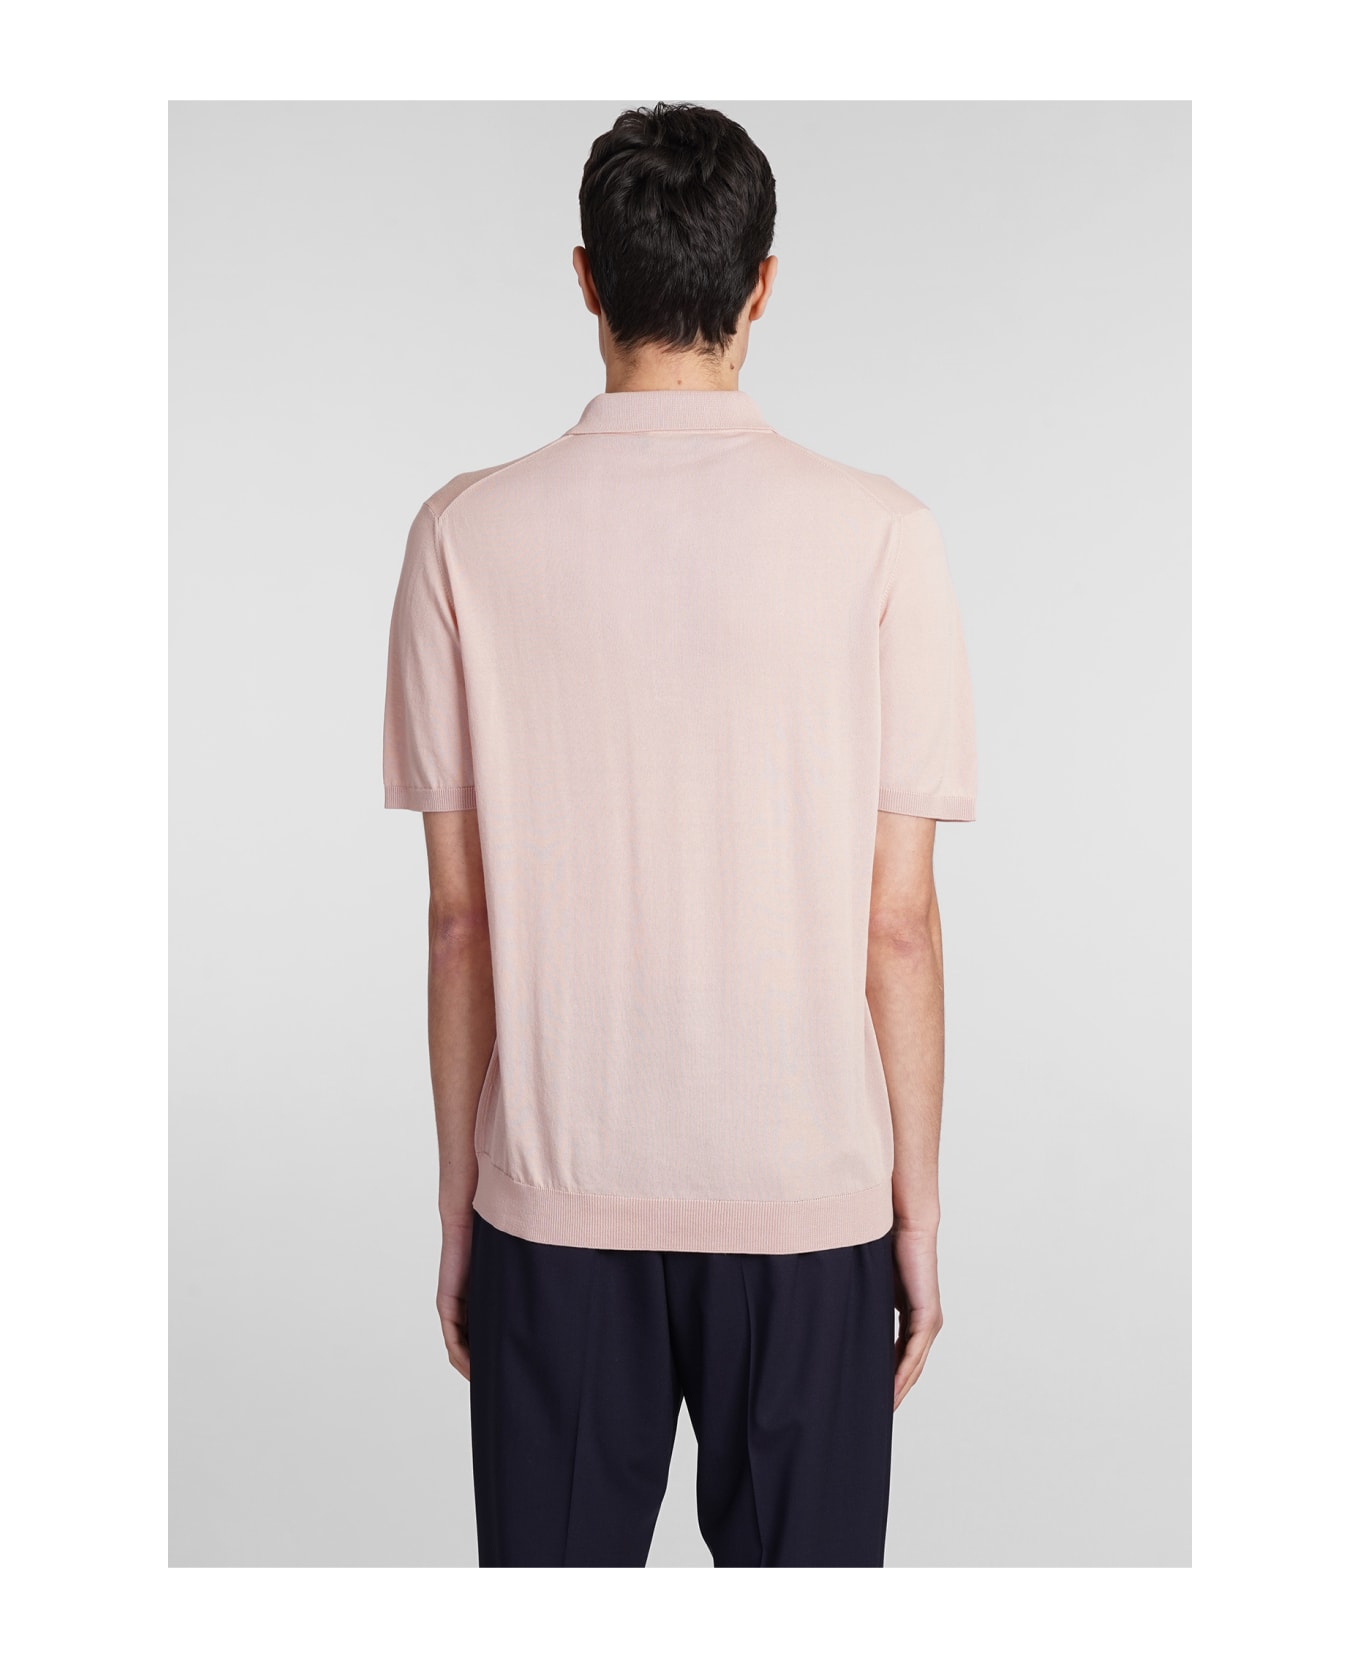 Roberto Collina Polo In Rose-pink Cotton - rose-pink ポロシャツ